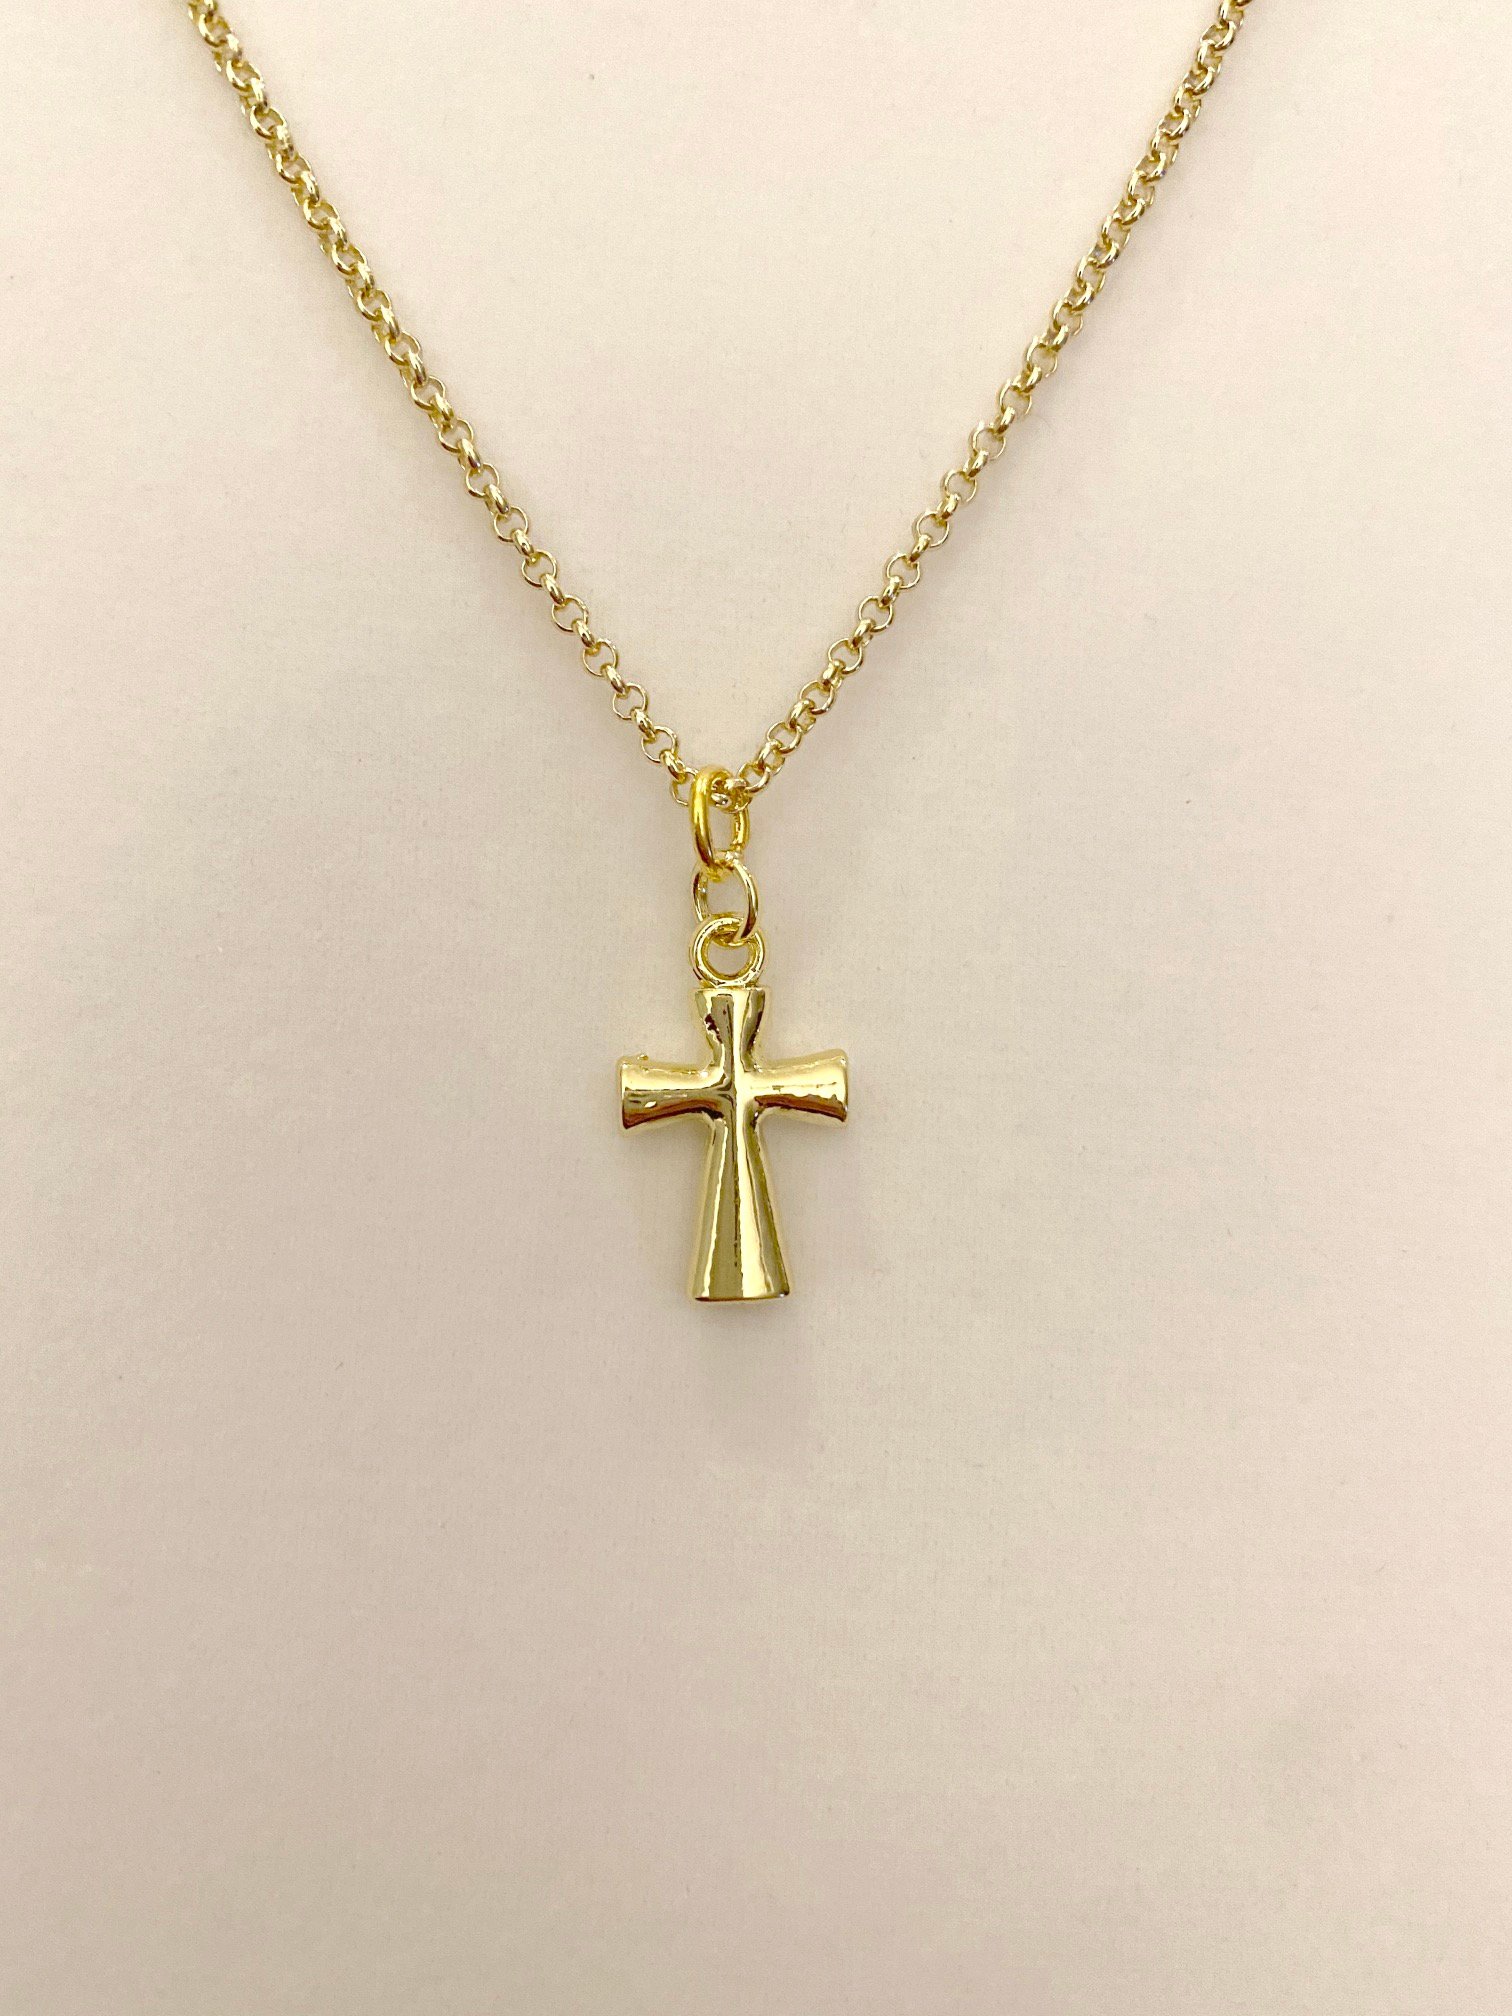 Cross Charm Pendant and Gold Chain Necklace | Copper Cross Metalweaving